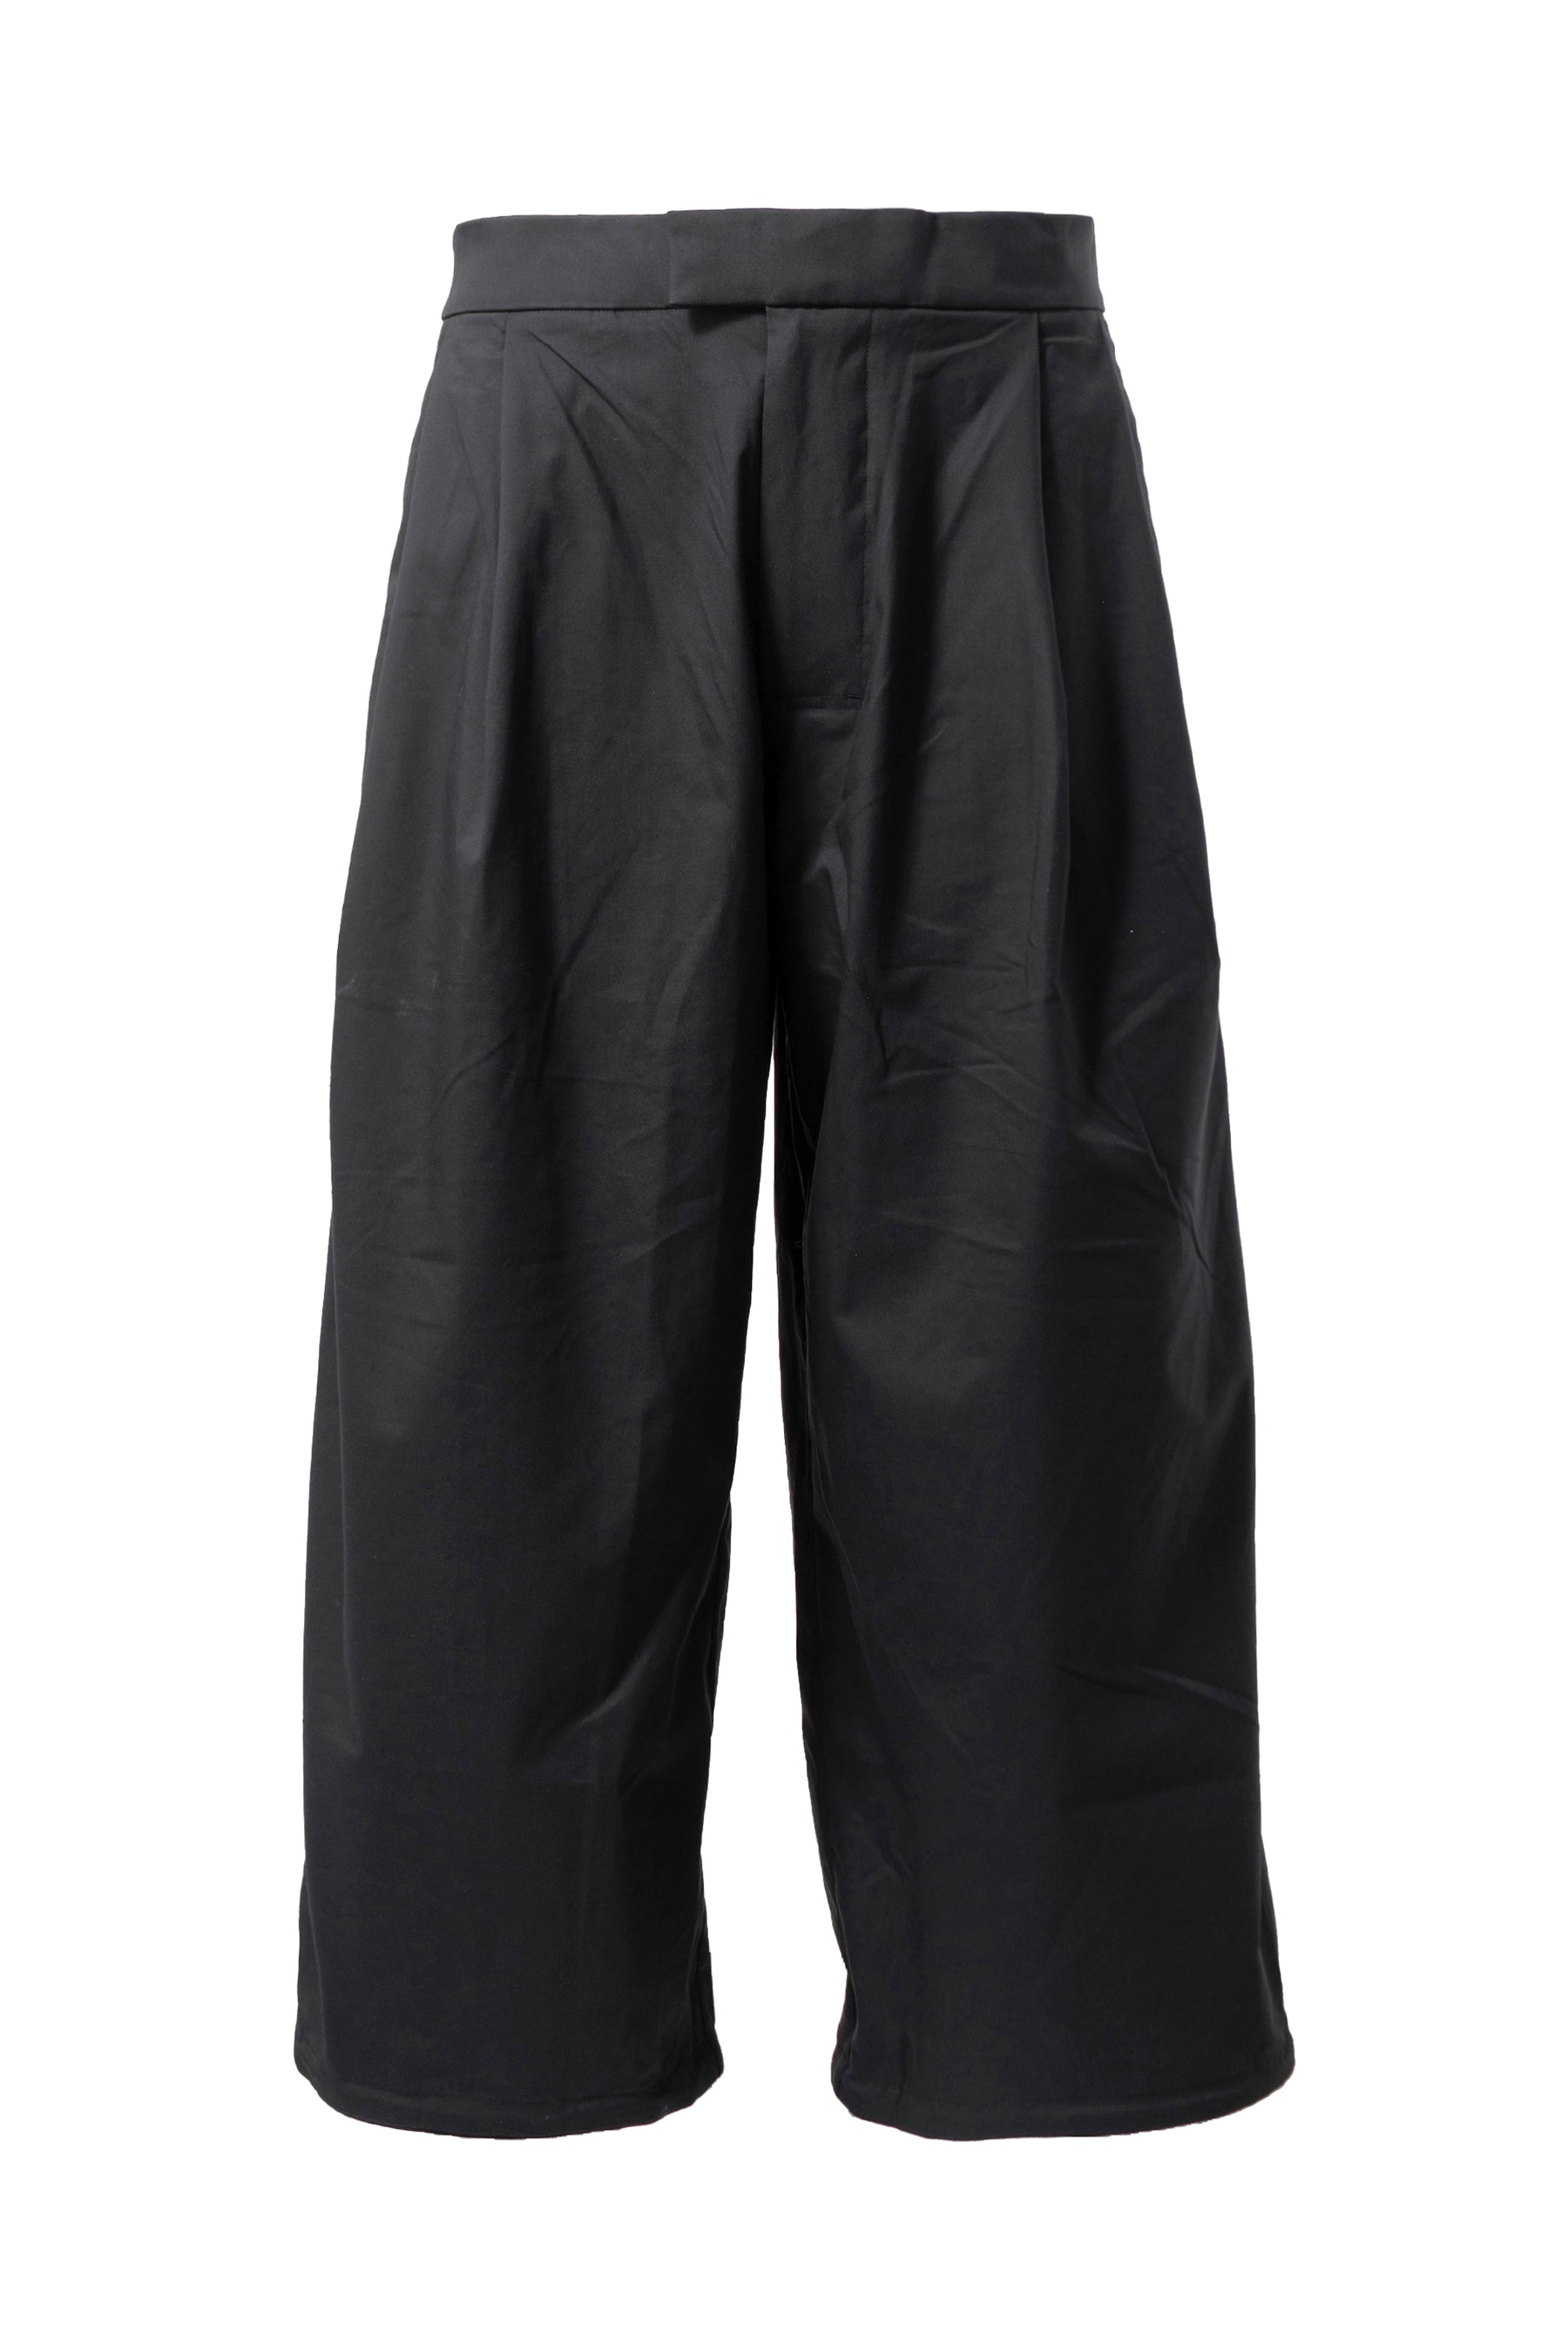 ACRONYM MICRO TWILL PLEATED TROUSER / BLK